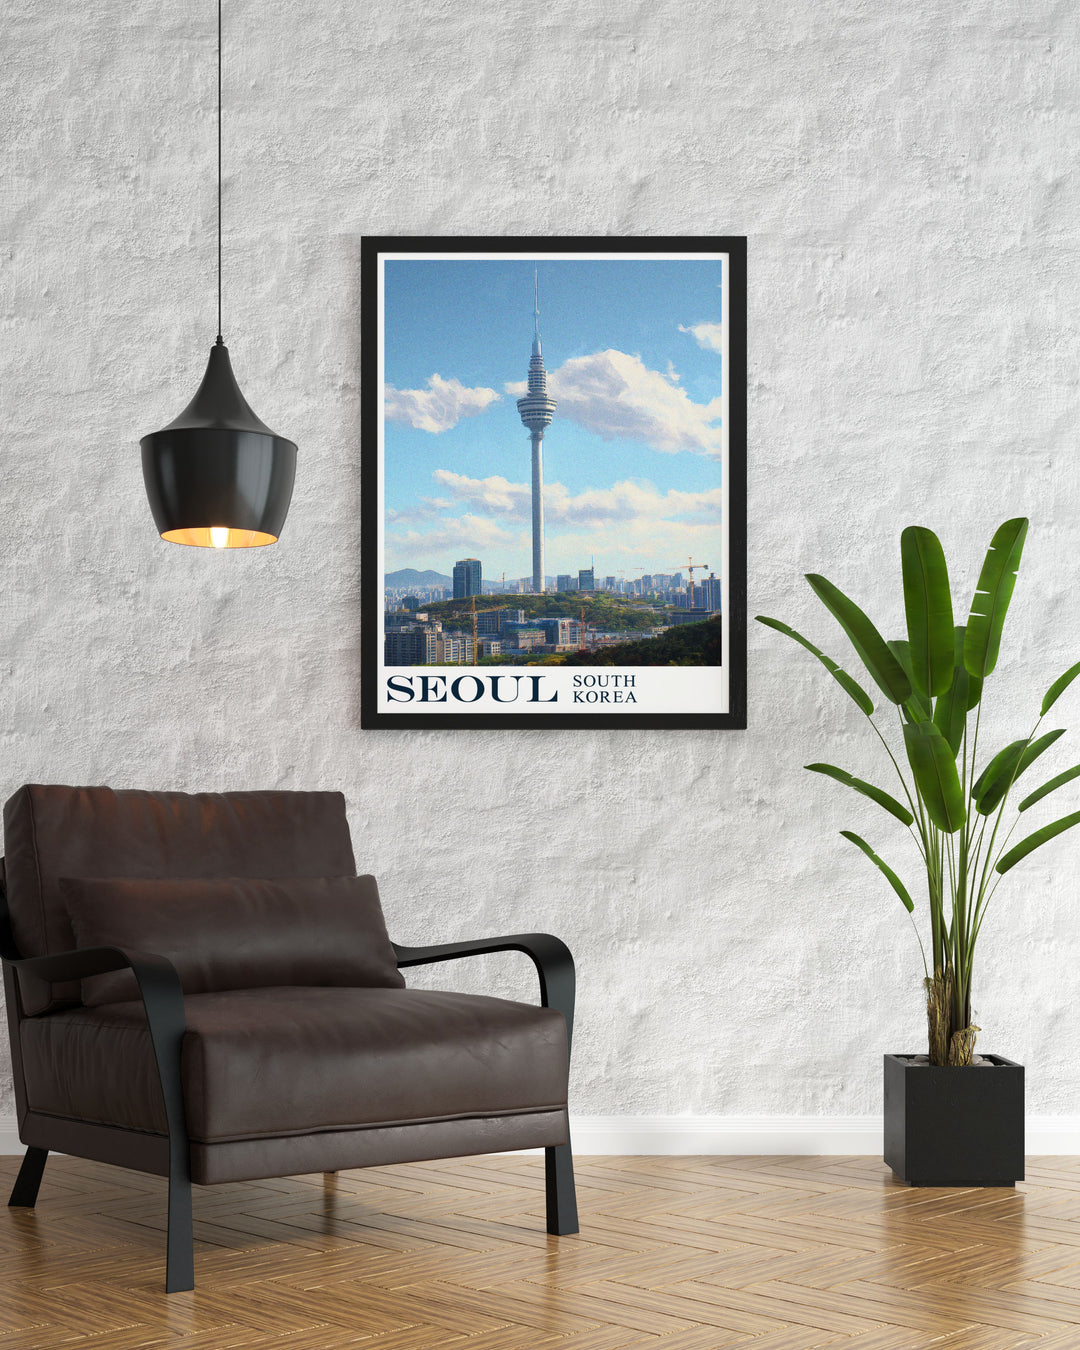 Featuring the bustling cityscape of Seoul, this poster showcases the contrast between historic sites and contemporary skyscrapers, offering a unique view of South Koreas vibrant capital.